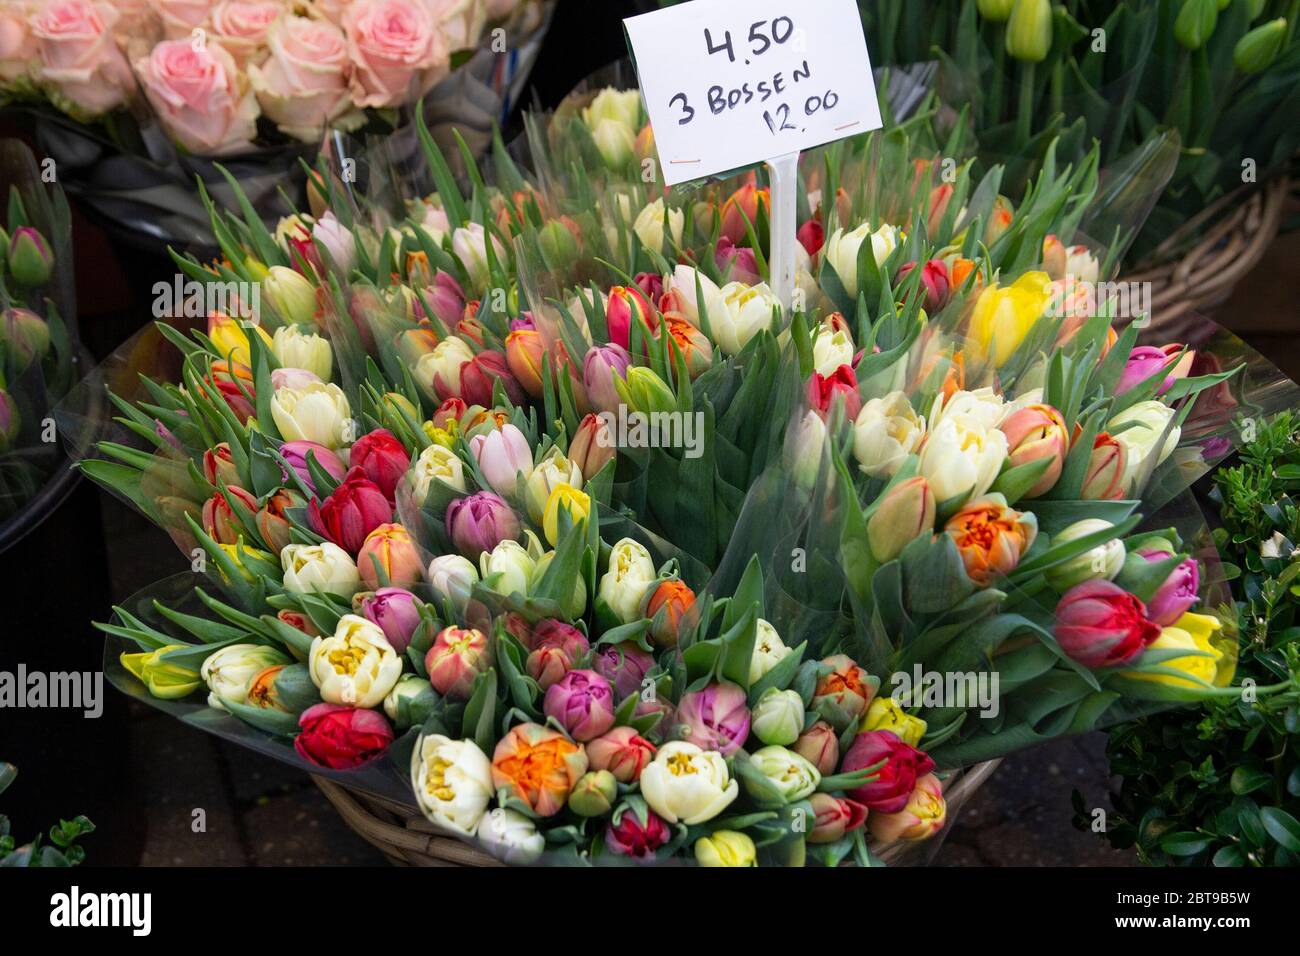 Colorful tulips on sale in florist shop Stock Photo